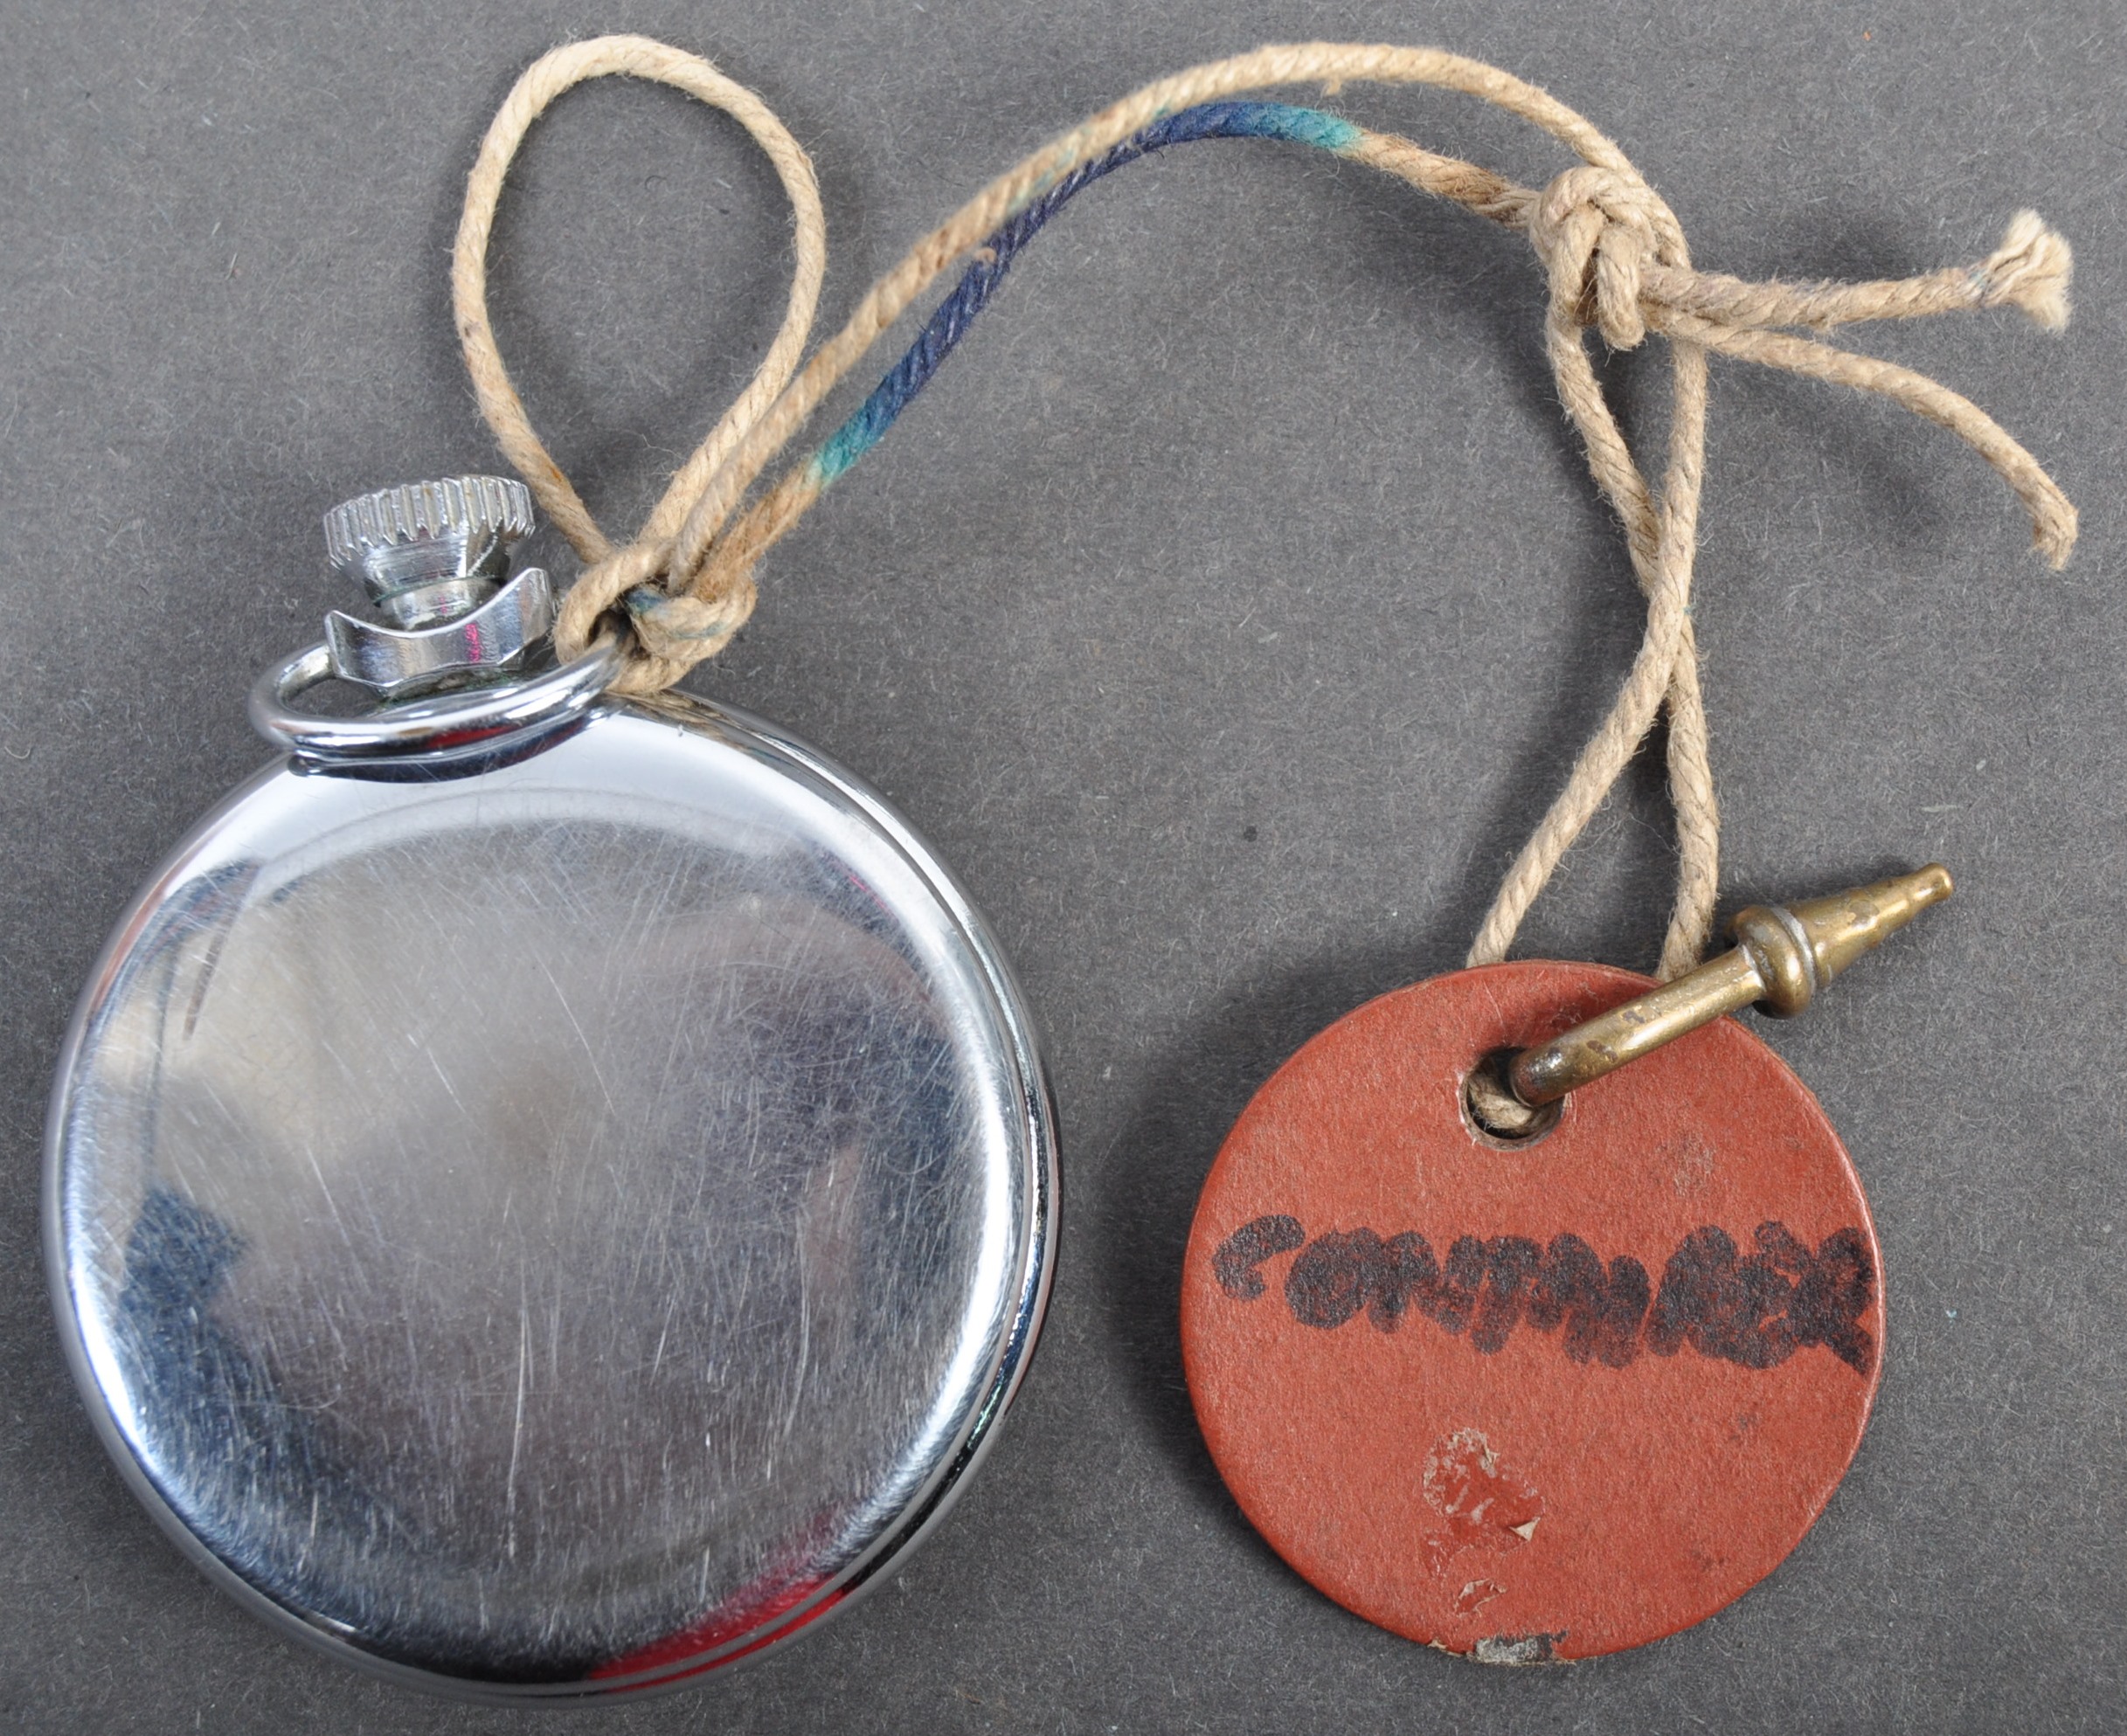 WWII SECOND WORLD WAR SERVICE USED POCKET WATCH - Image 2 of 2